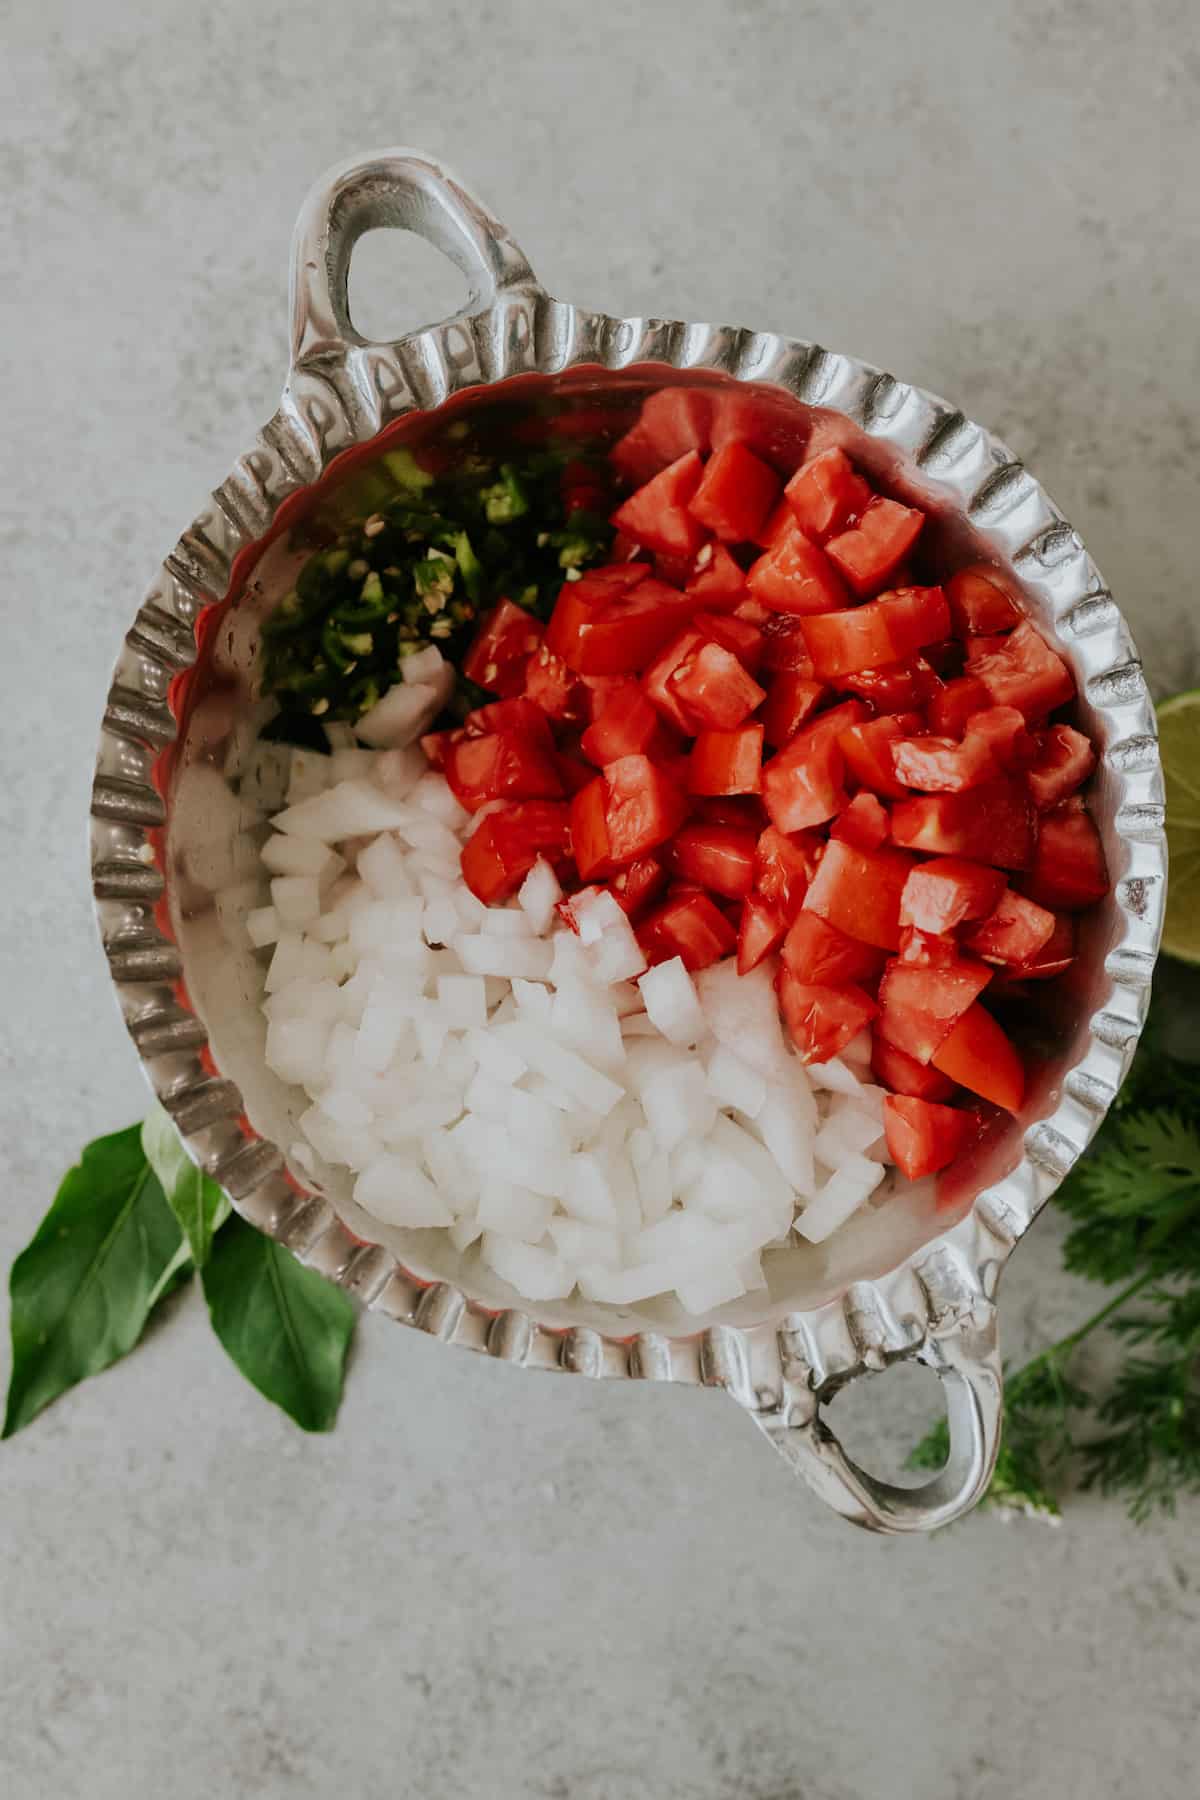 Chopped salsa bandera ingredients arranged in a large silver serving bowl with two handles